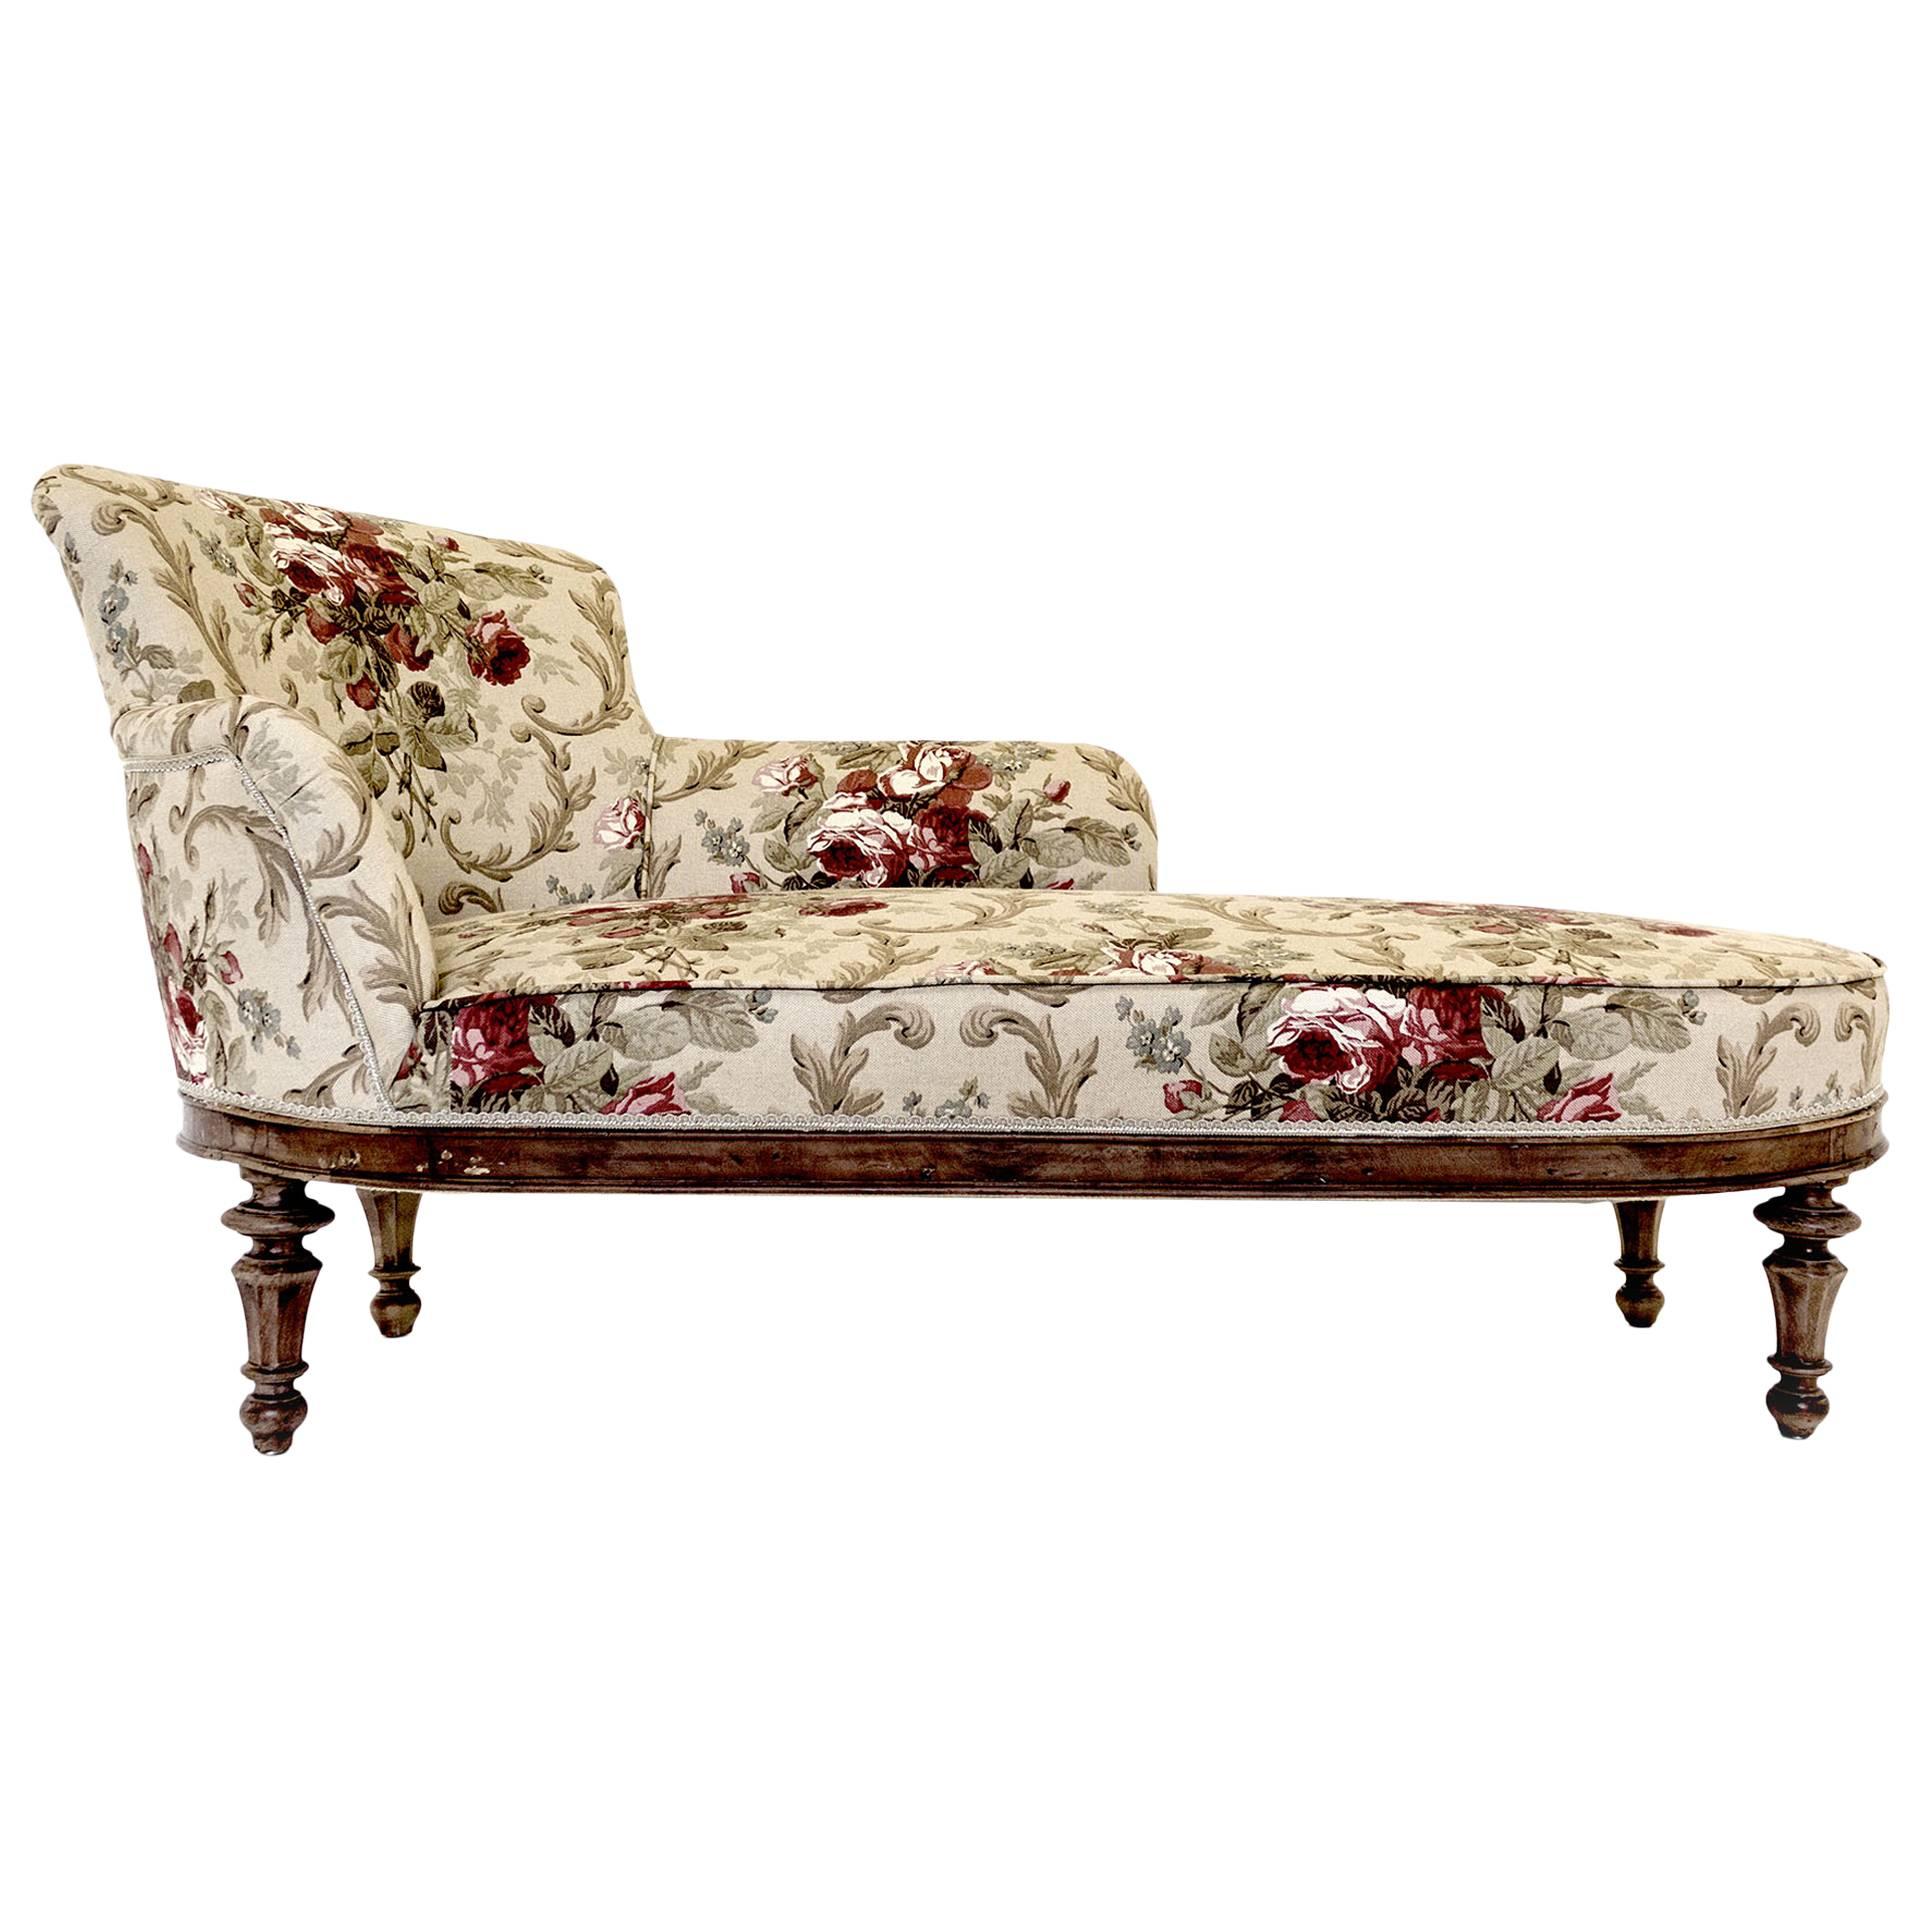 19th Century Chaise Longue For Sale